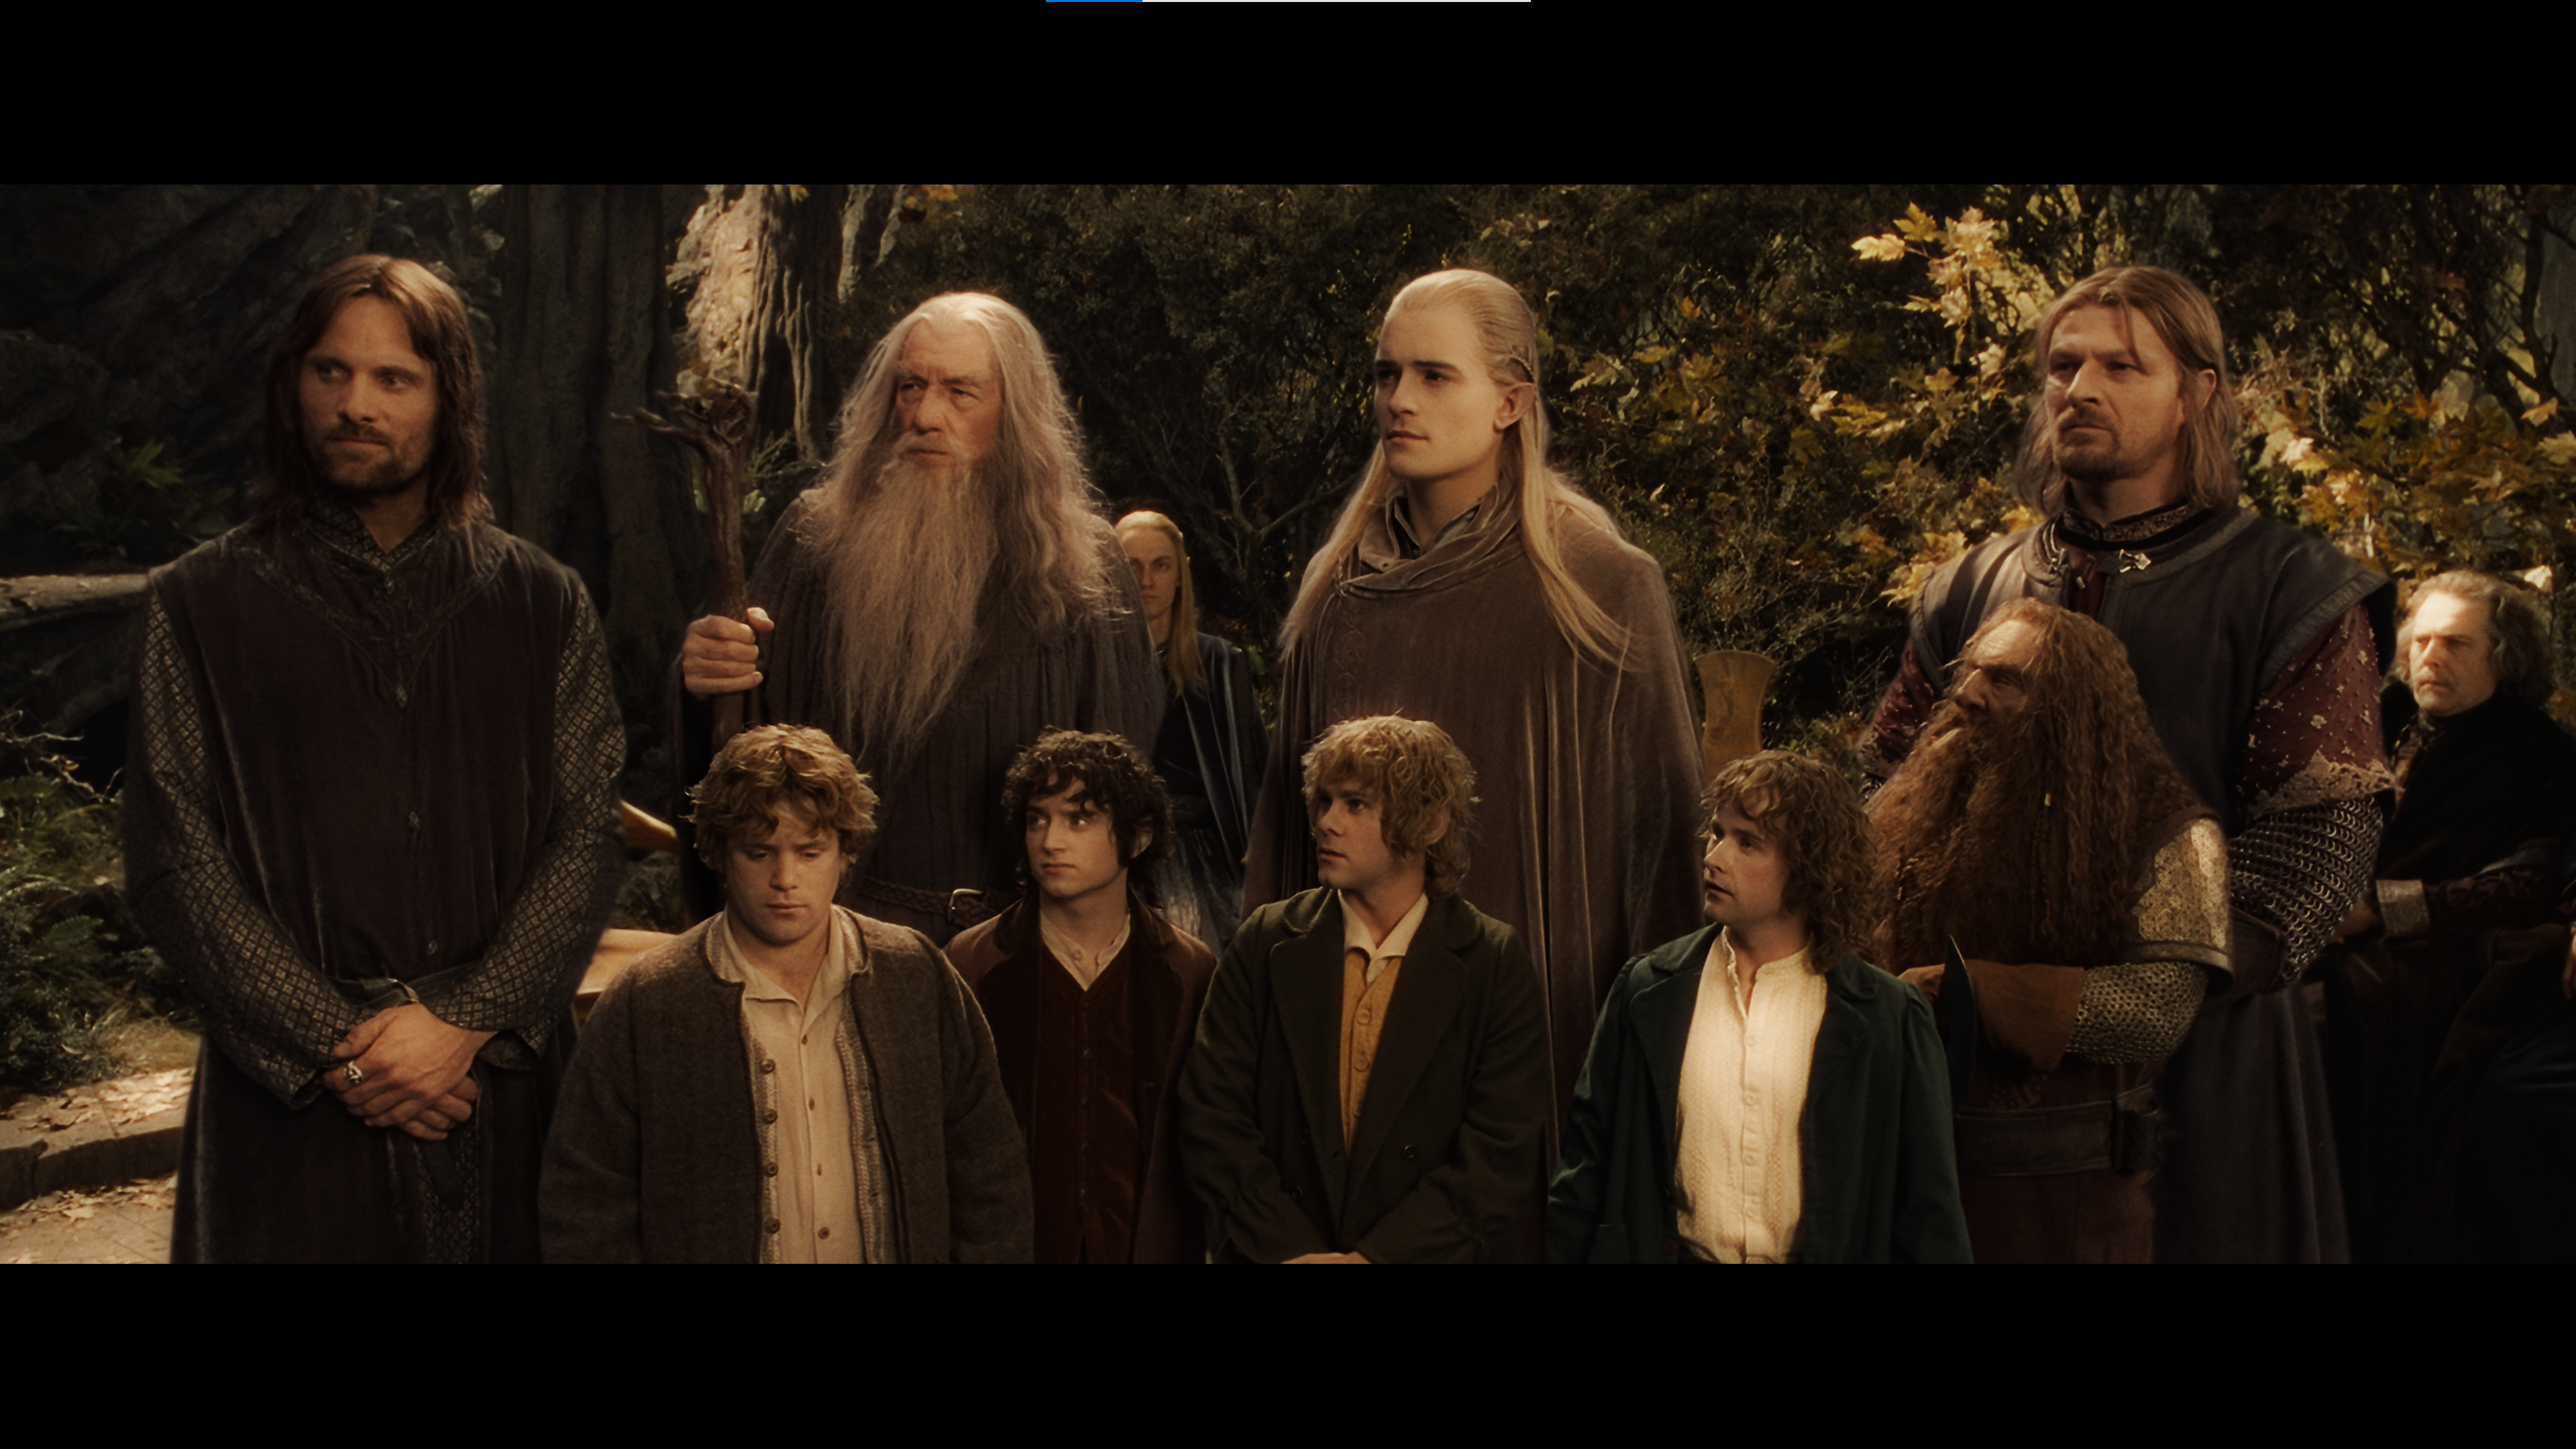 Zuinig balkon zelfstandig naamwoord The Lord of the Rings: The Fellowship of the Ring - 4K UHD Blu-ray Ultra HD  Review | High Def Digest